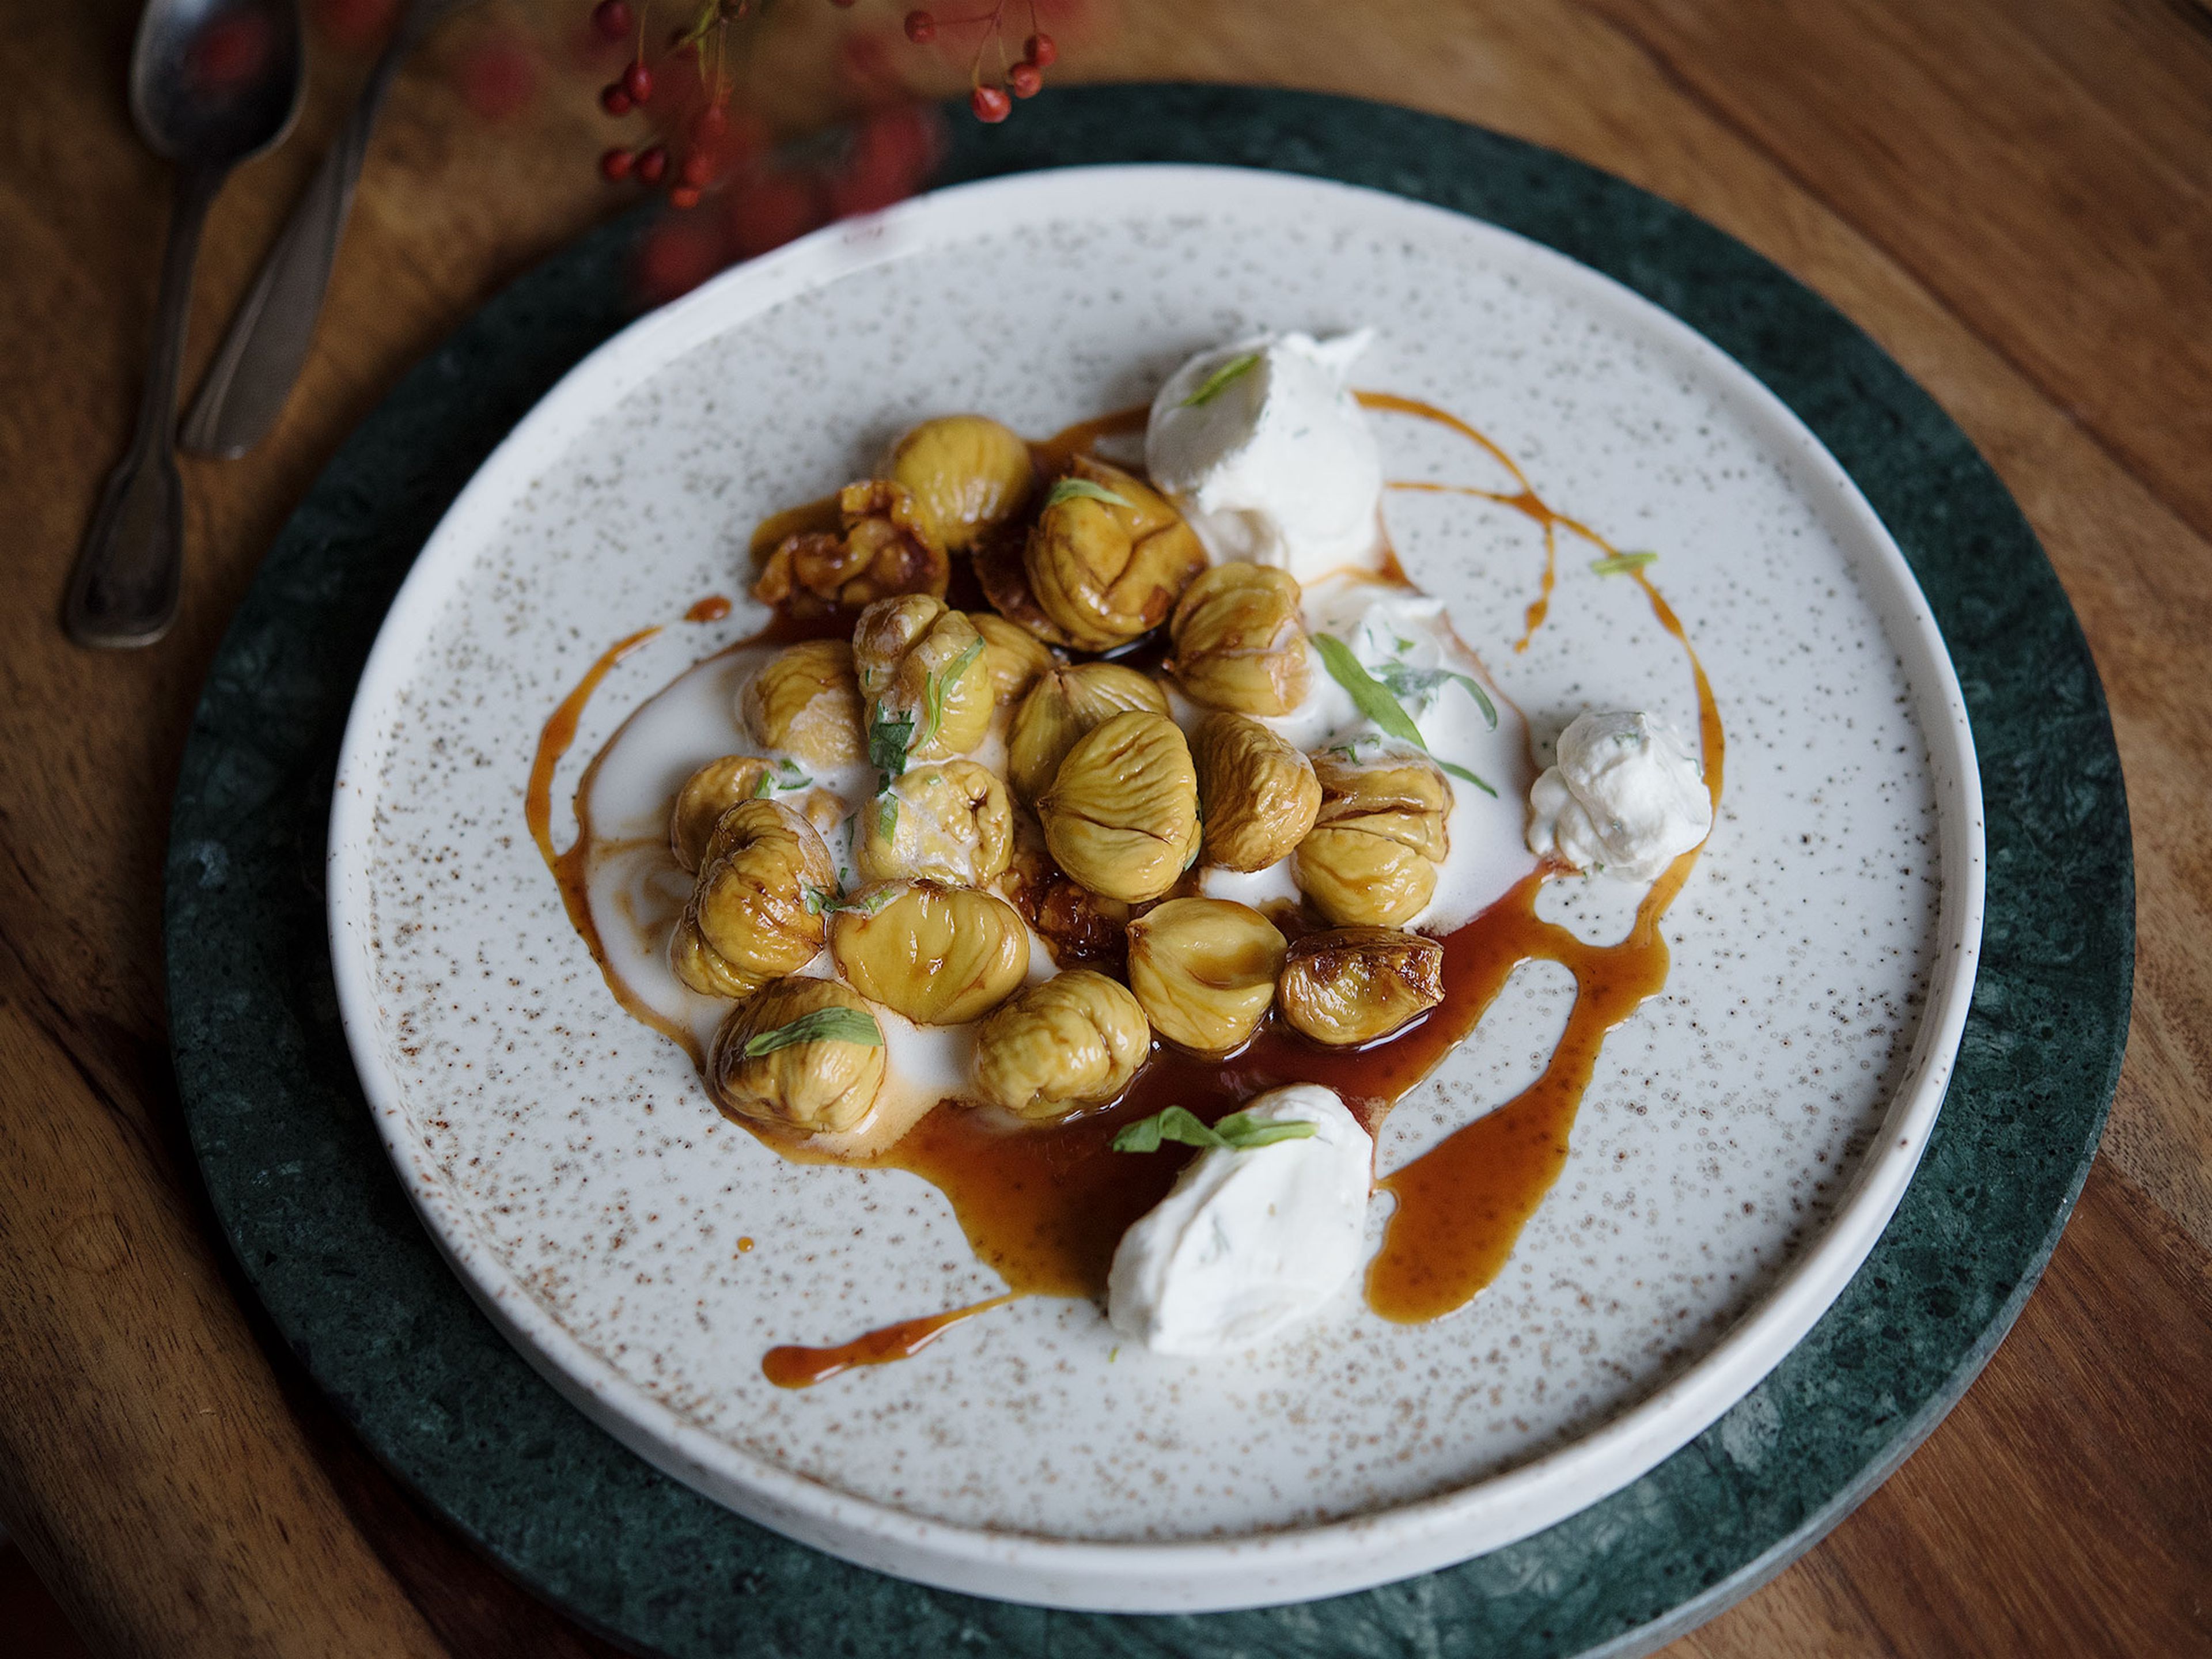 Glazed chestnuts with whipped sherry cream